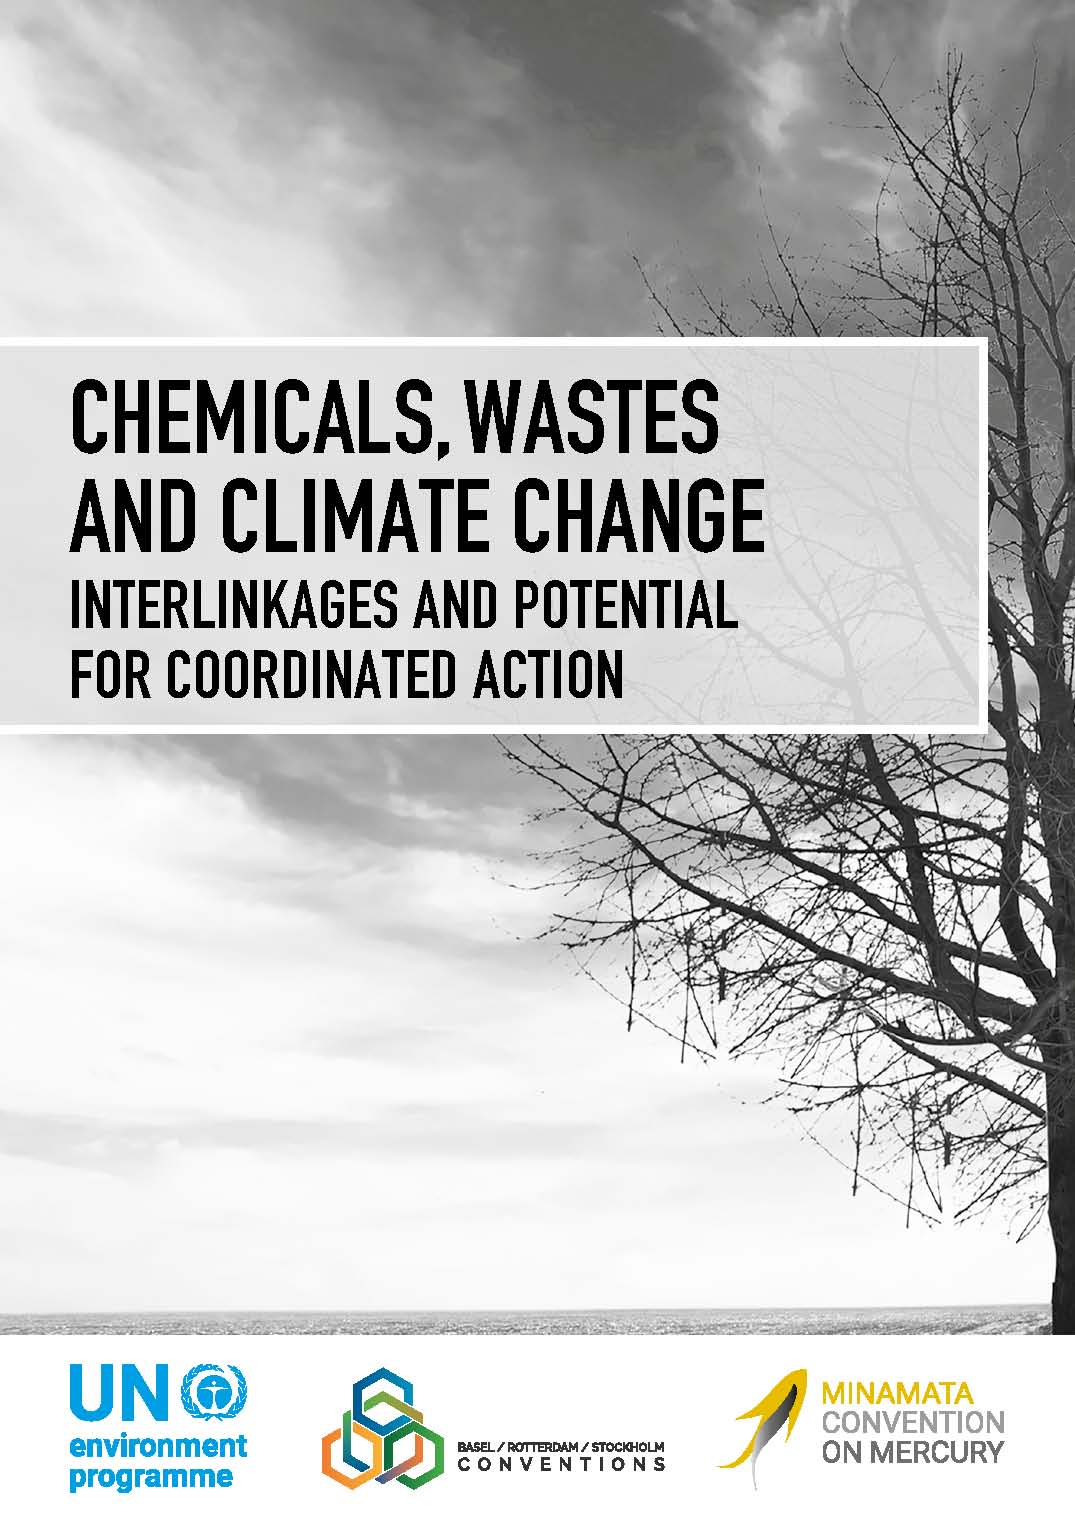 Chemicals, wastes and climate change - Interlinkages and potential for coordinated action